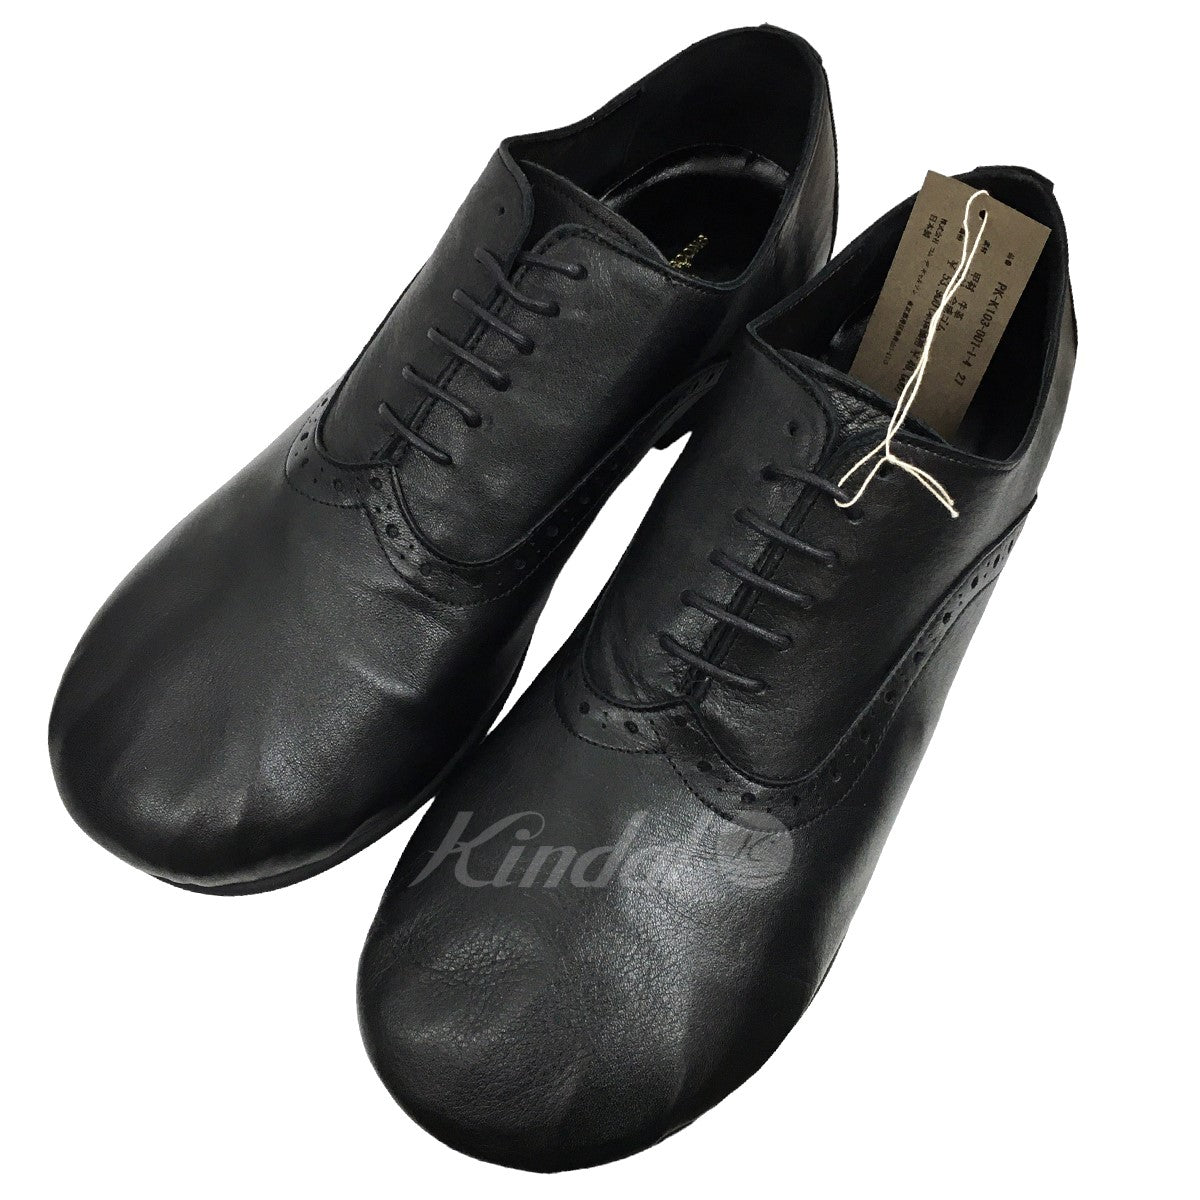 COMME des GARCONS HOMME PLUS(コムデギャルソンオムプリュス) 23SS OXFORD SHOES グローブ レザーシューズ